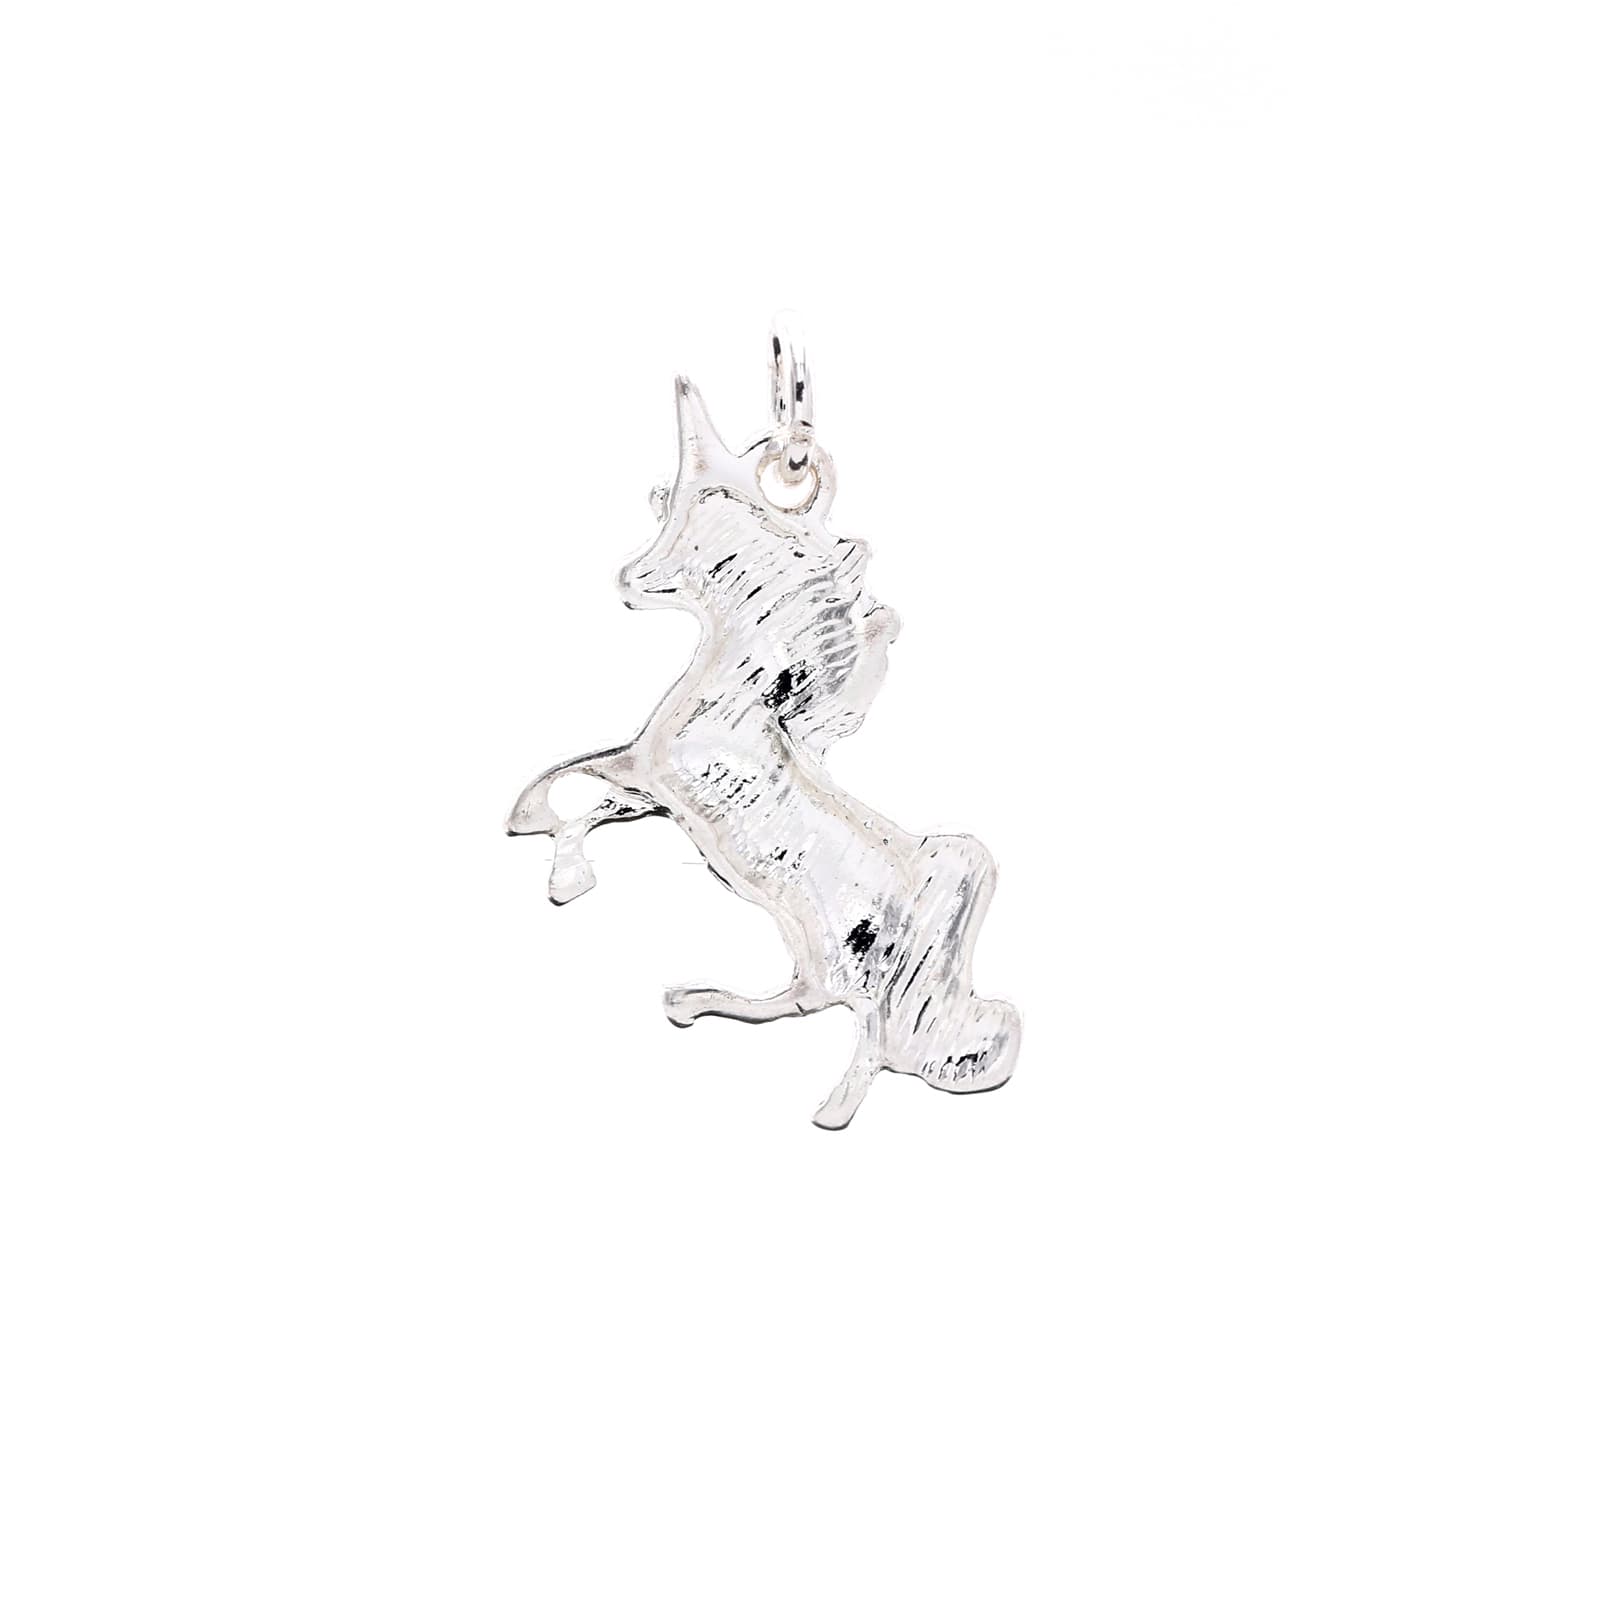 Details about   XSmall Oxidized Silver Unicorn Charms 4 SOGB06403LR 